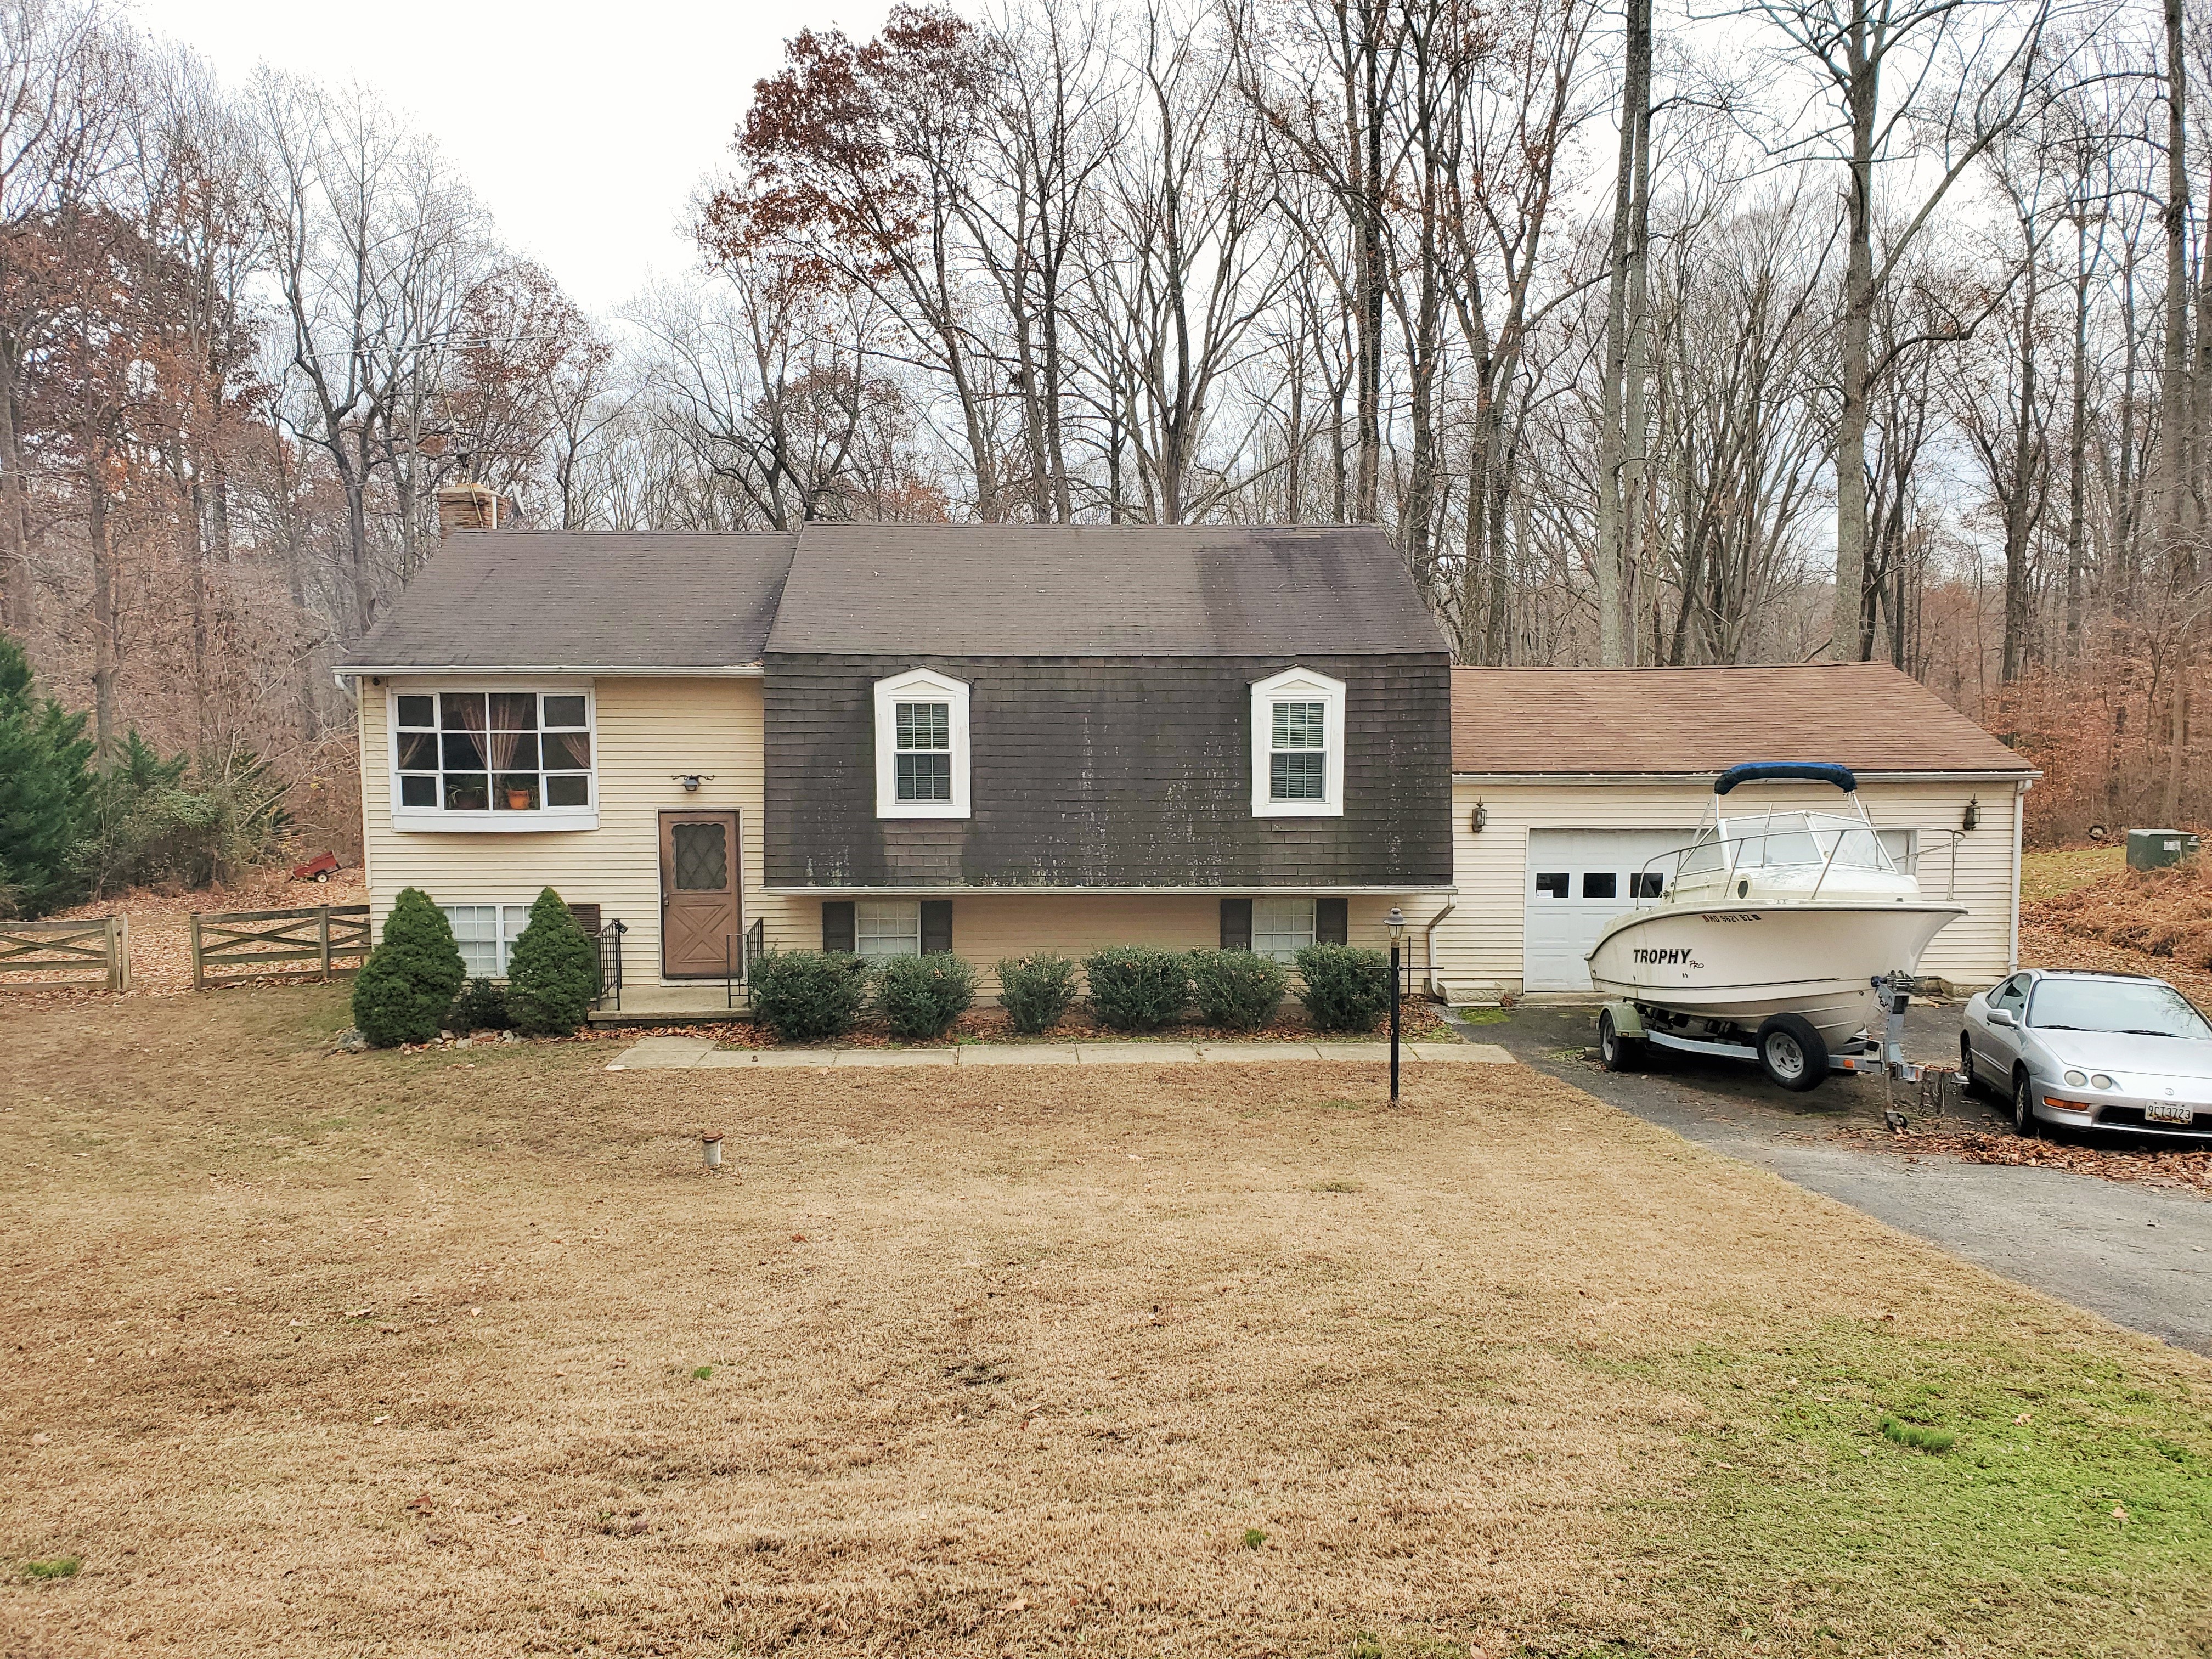 Hunters Paradise- Home for Sale in Owings, MD 20736